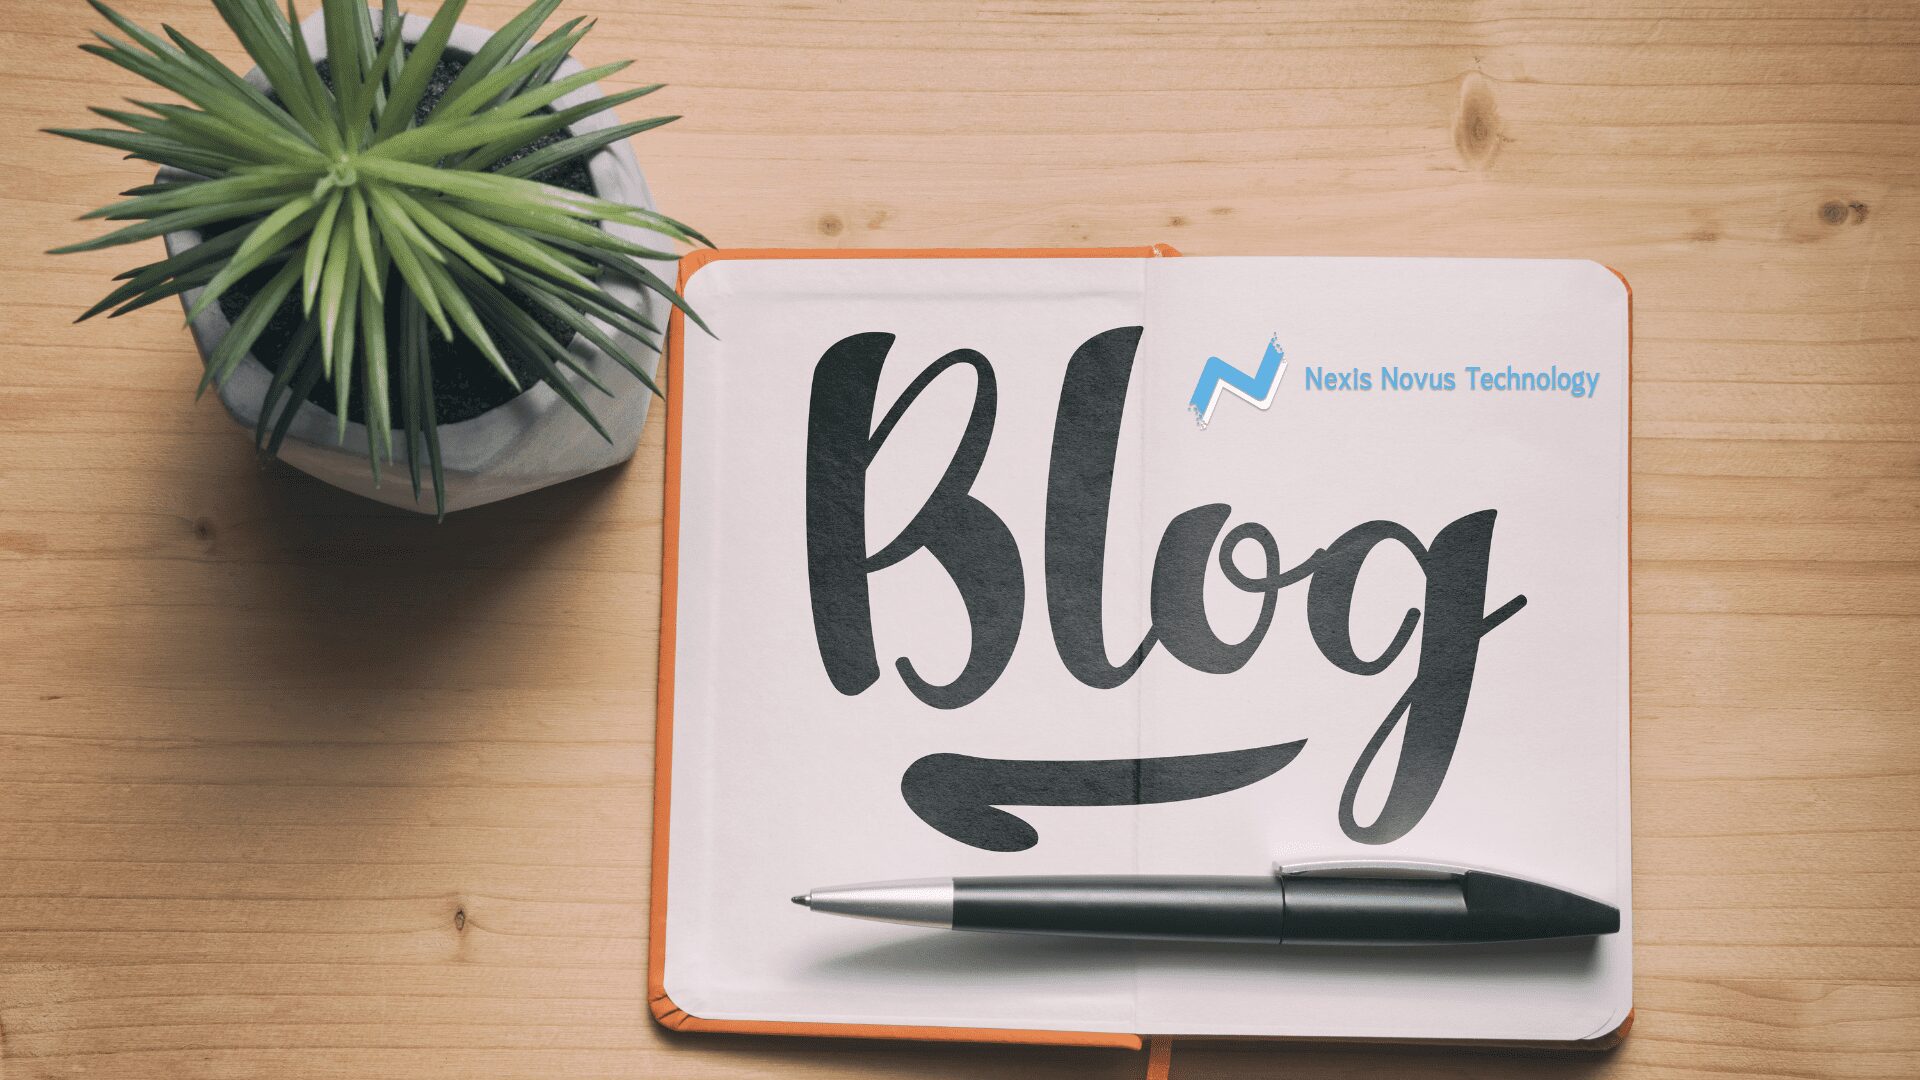 general blogging resources by nexis novus technology